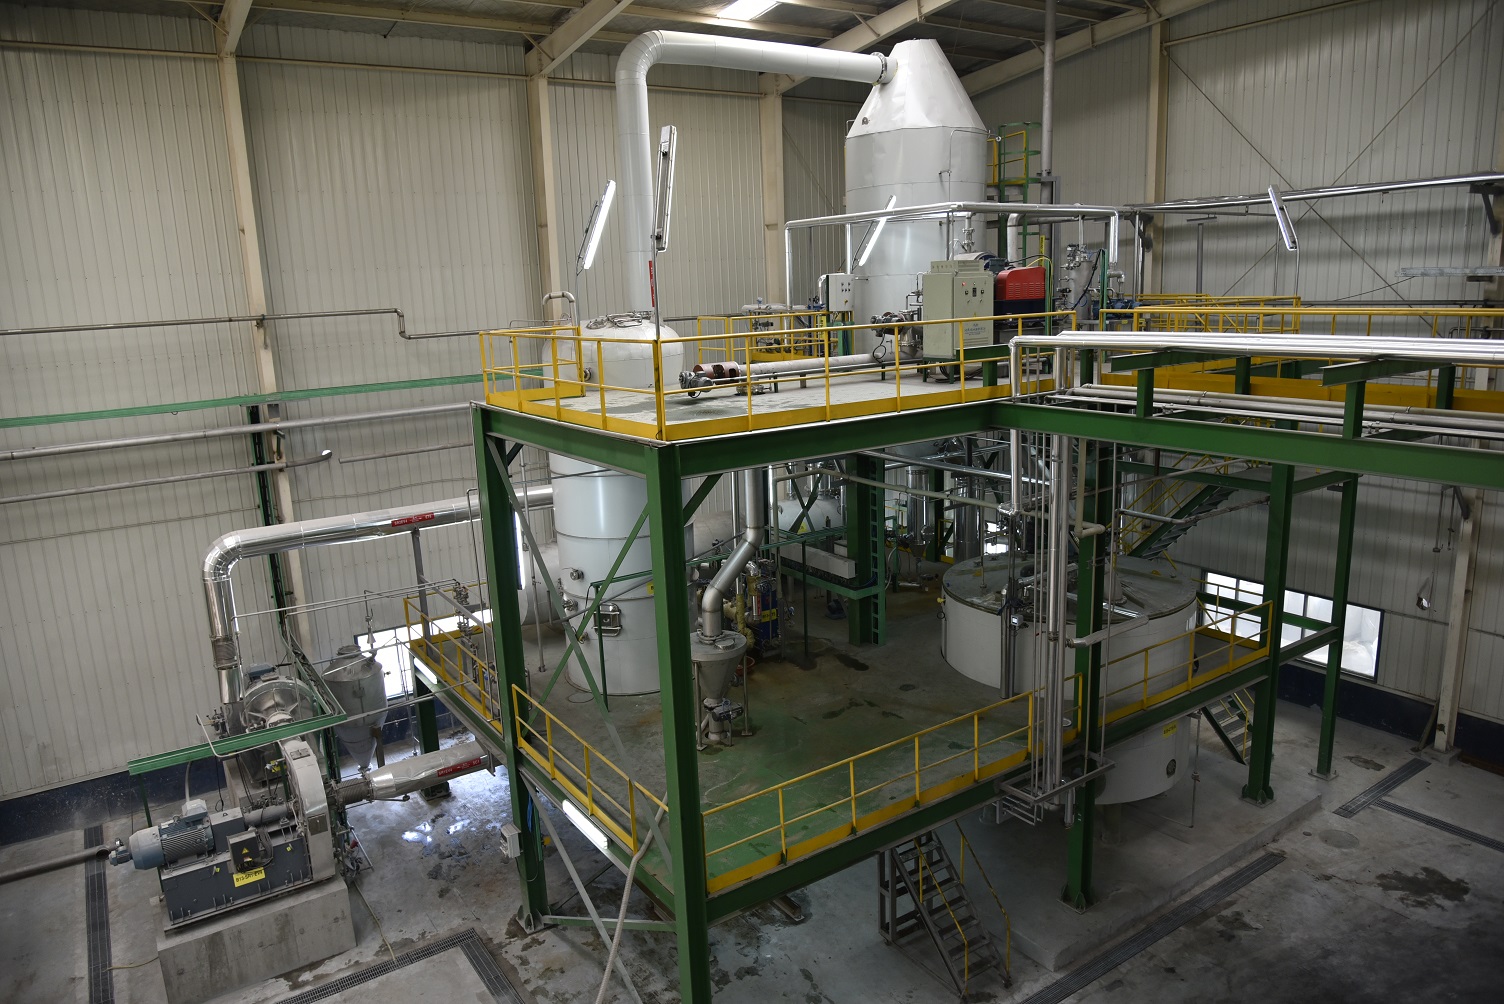 France Evaporation has commissioned  a new ammonium sulfate crystallization unit in China.